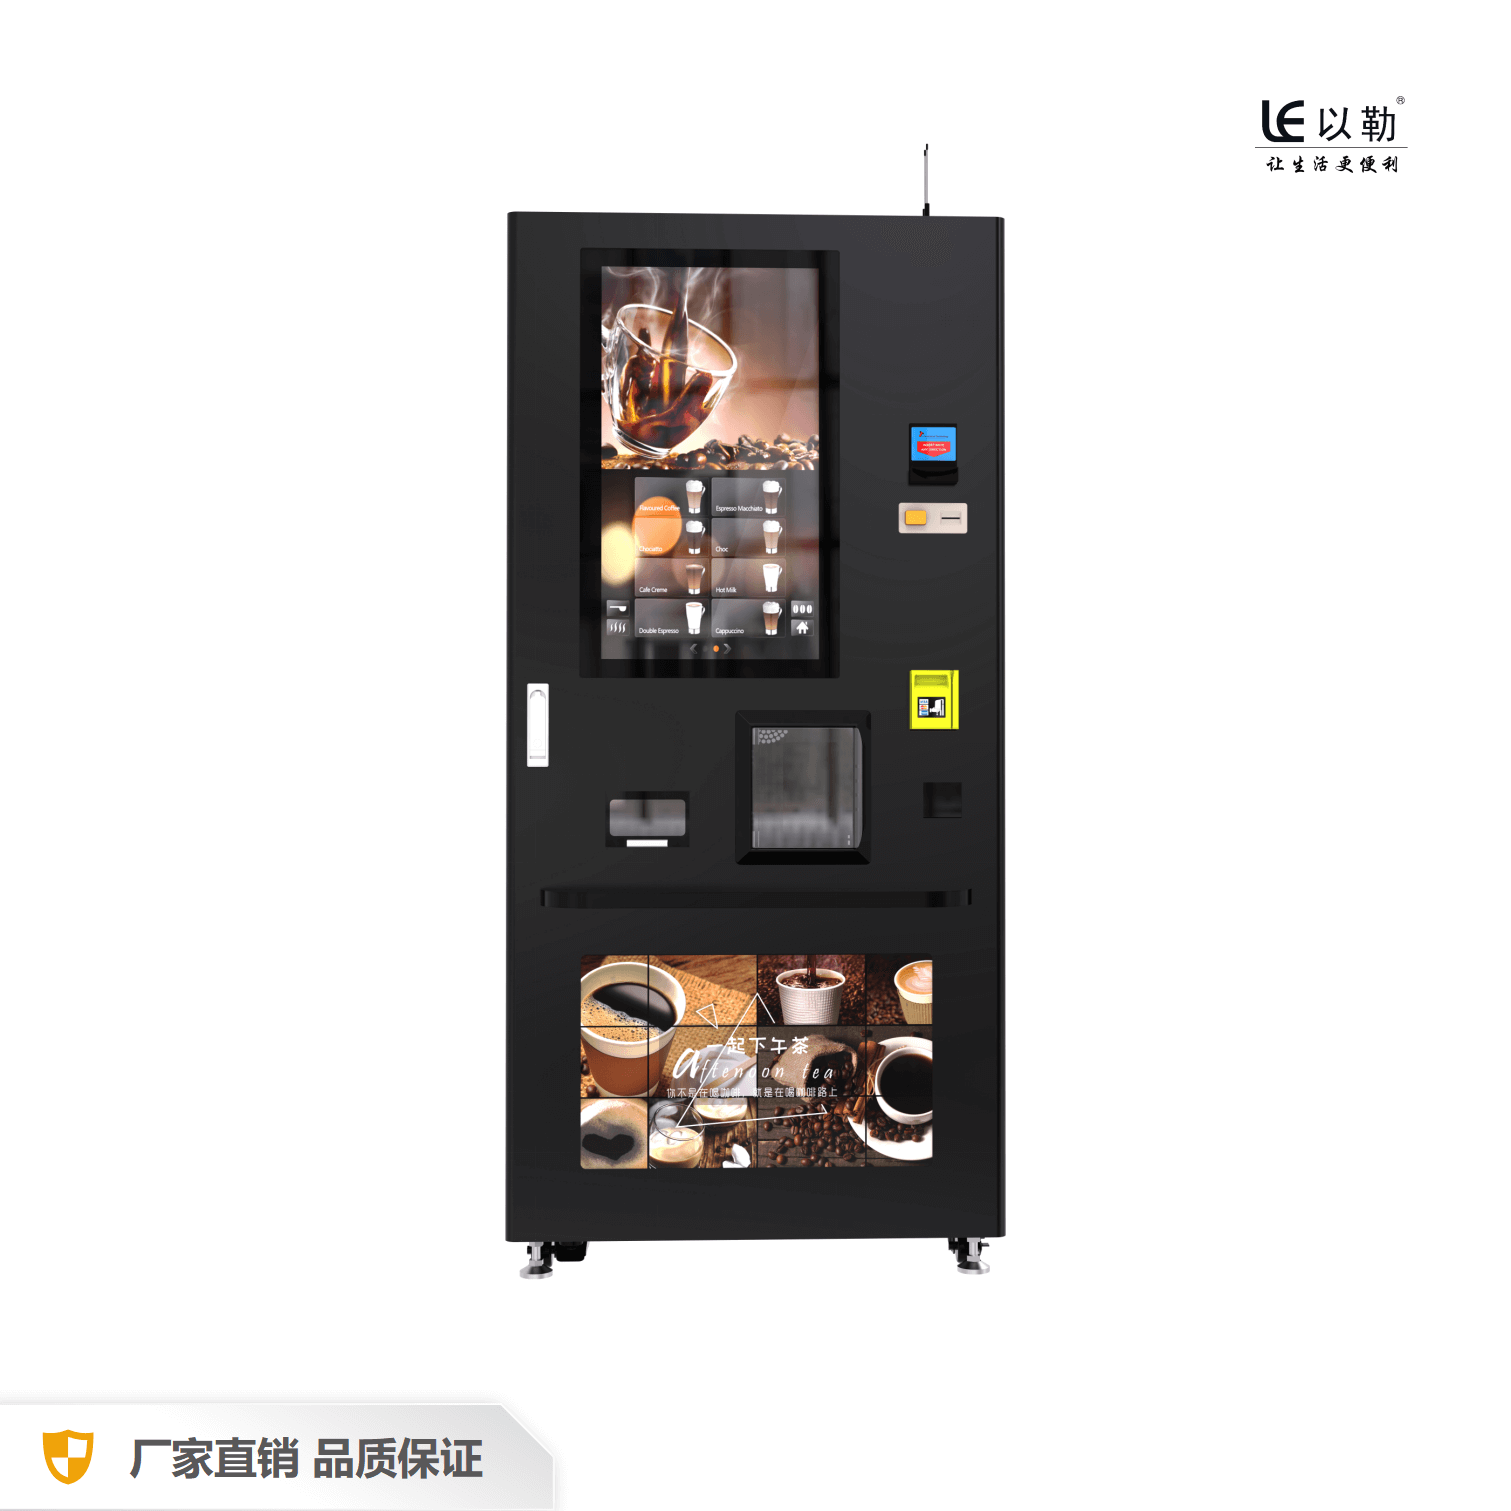 Large Auto Coffee Vending Machine For Hotel